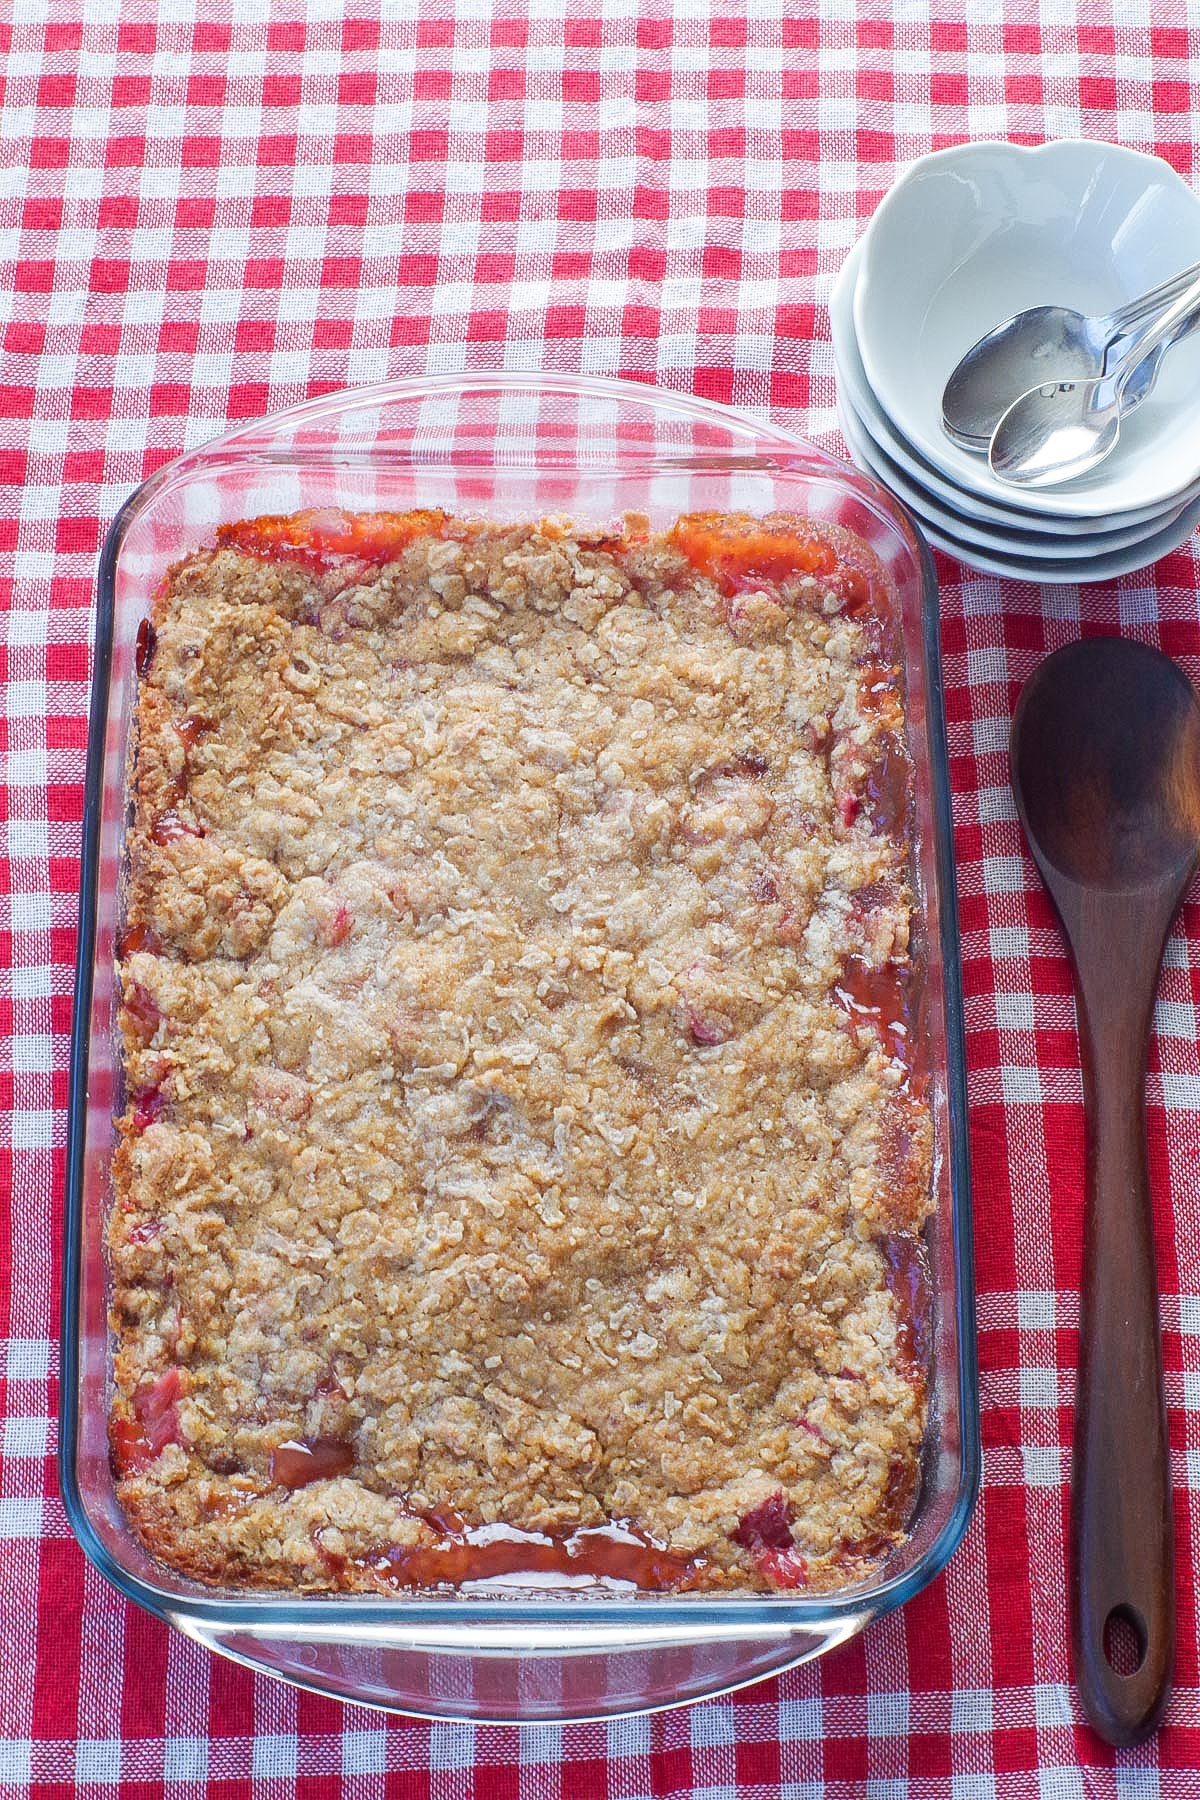 whole rhubarb crisp in glass pan with wooden spoon on one side and white bowls and spoons on the other